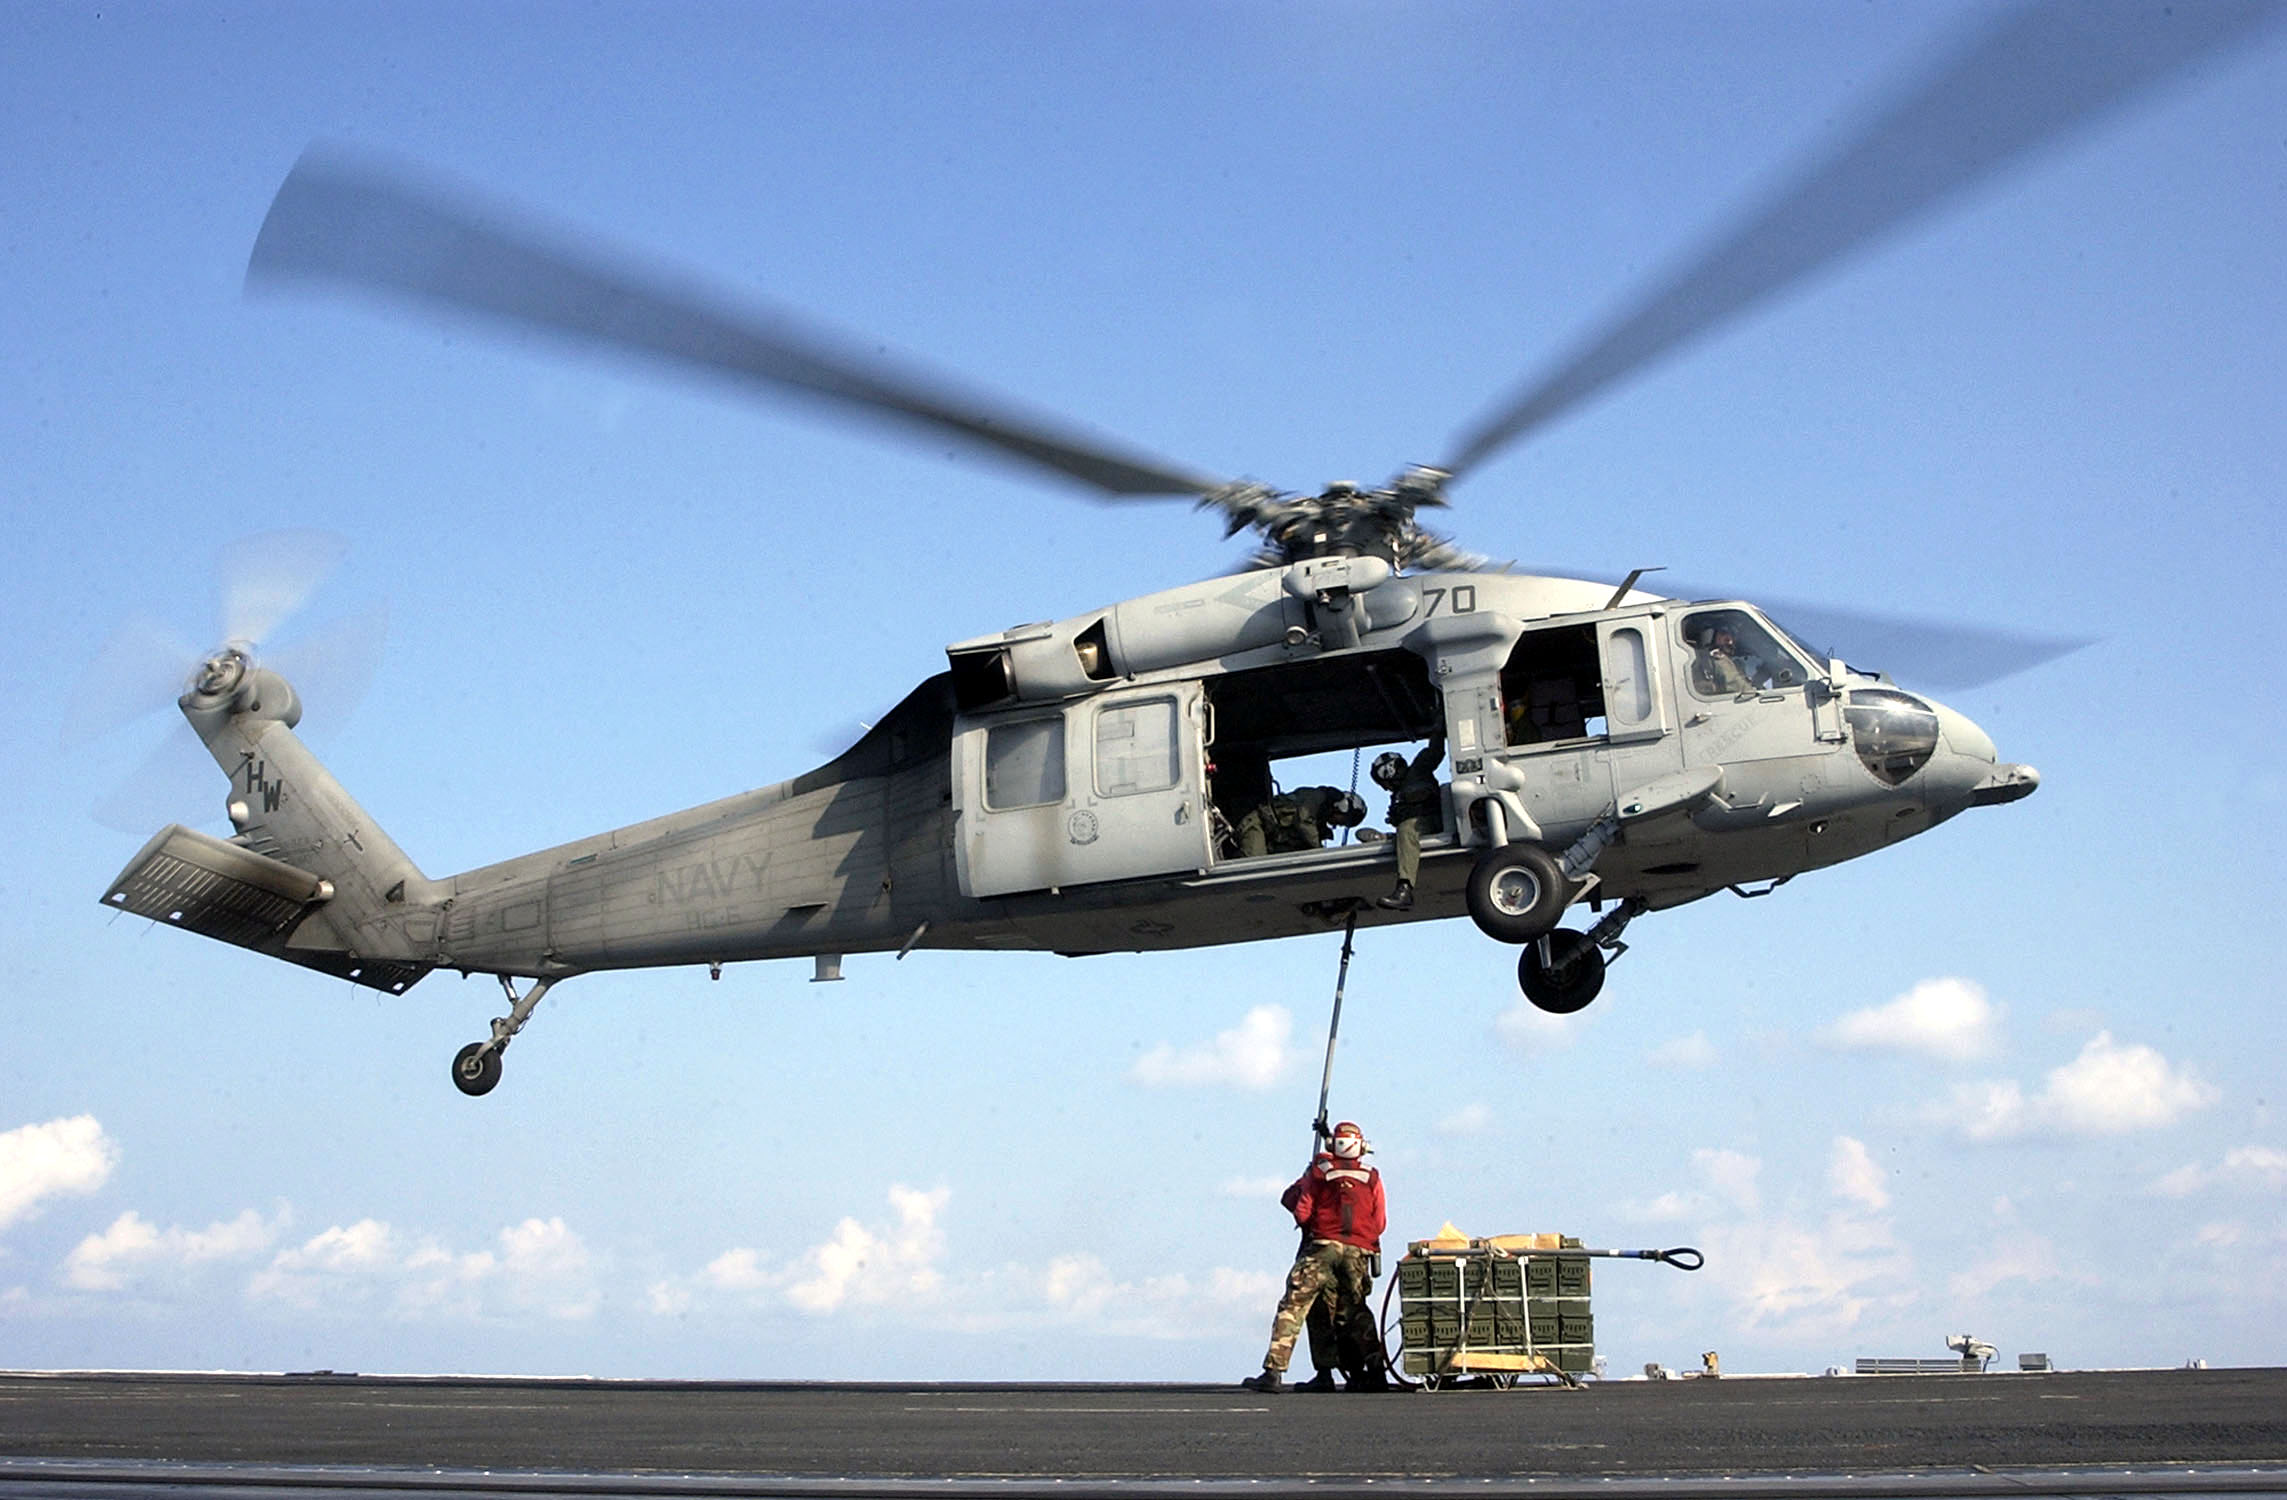 US Navy 030721-N-4308O-012 Aviation Ordnanceman attach a replenishment sling containing ordnance to an MH-60S Knighthawk